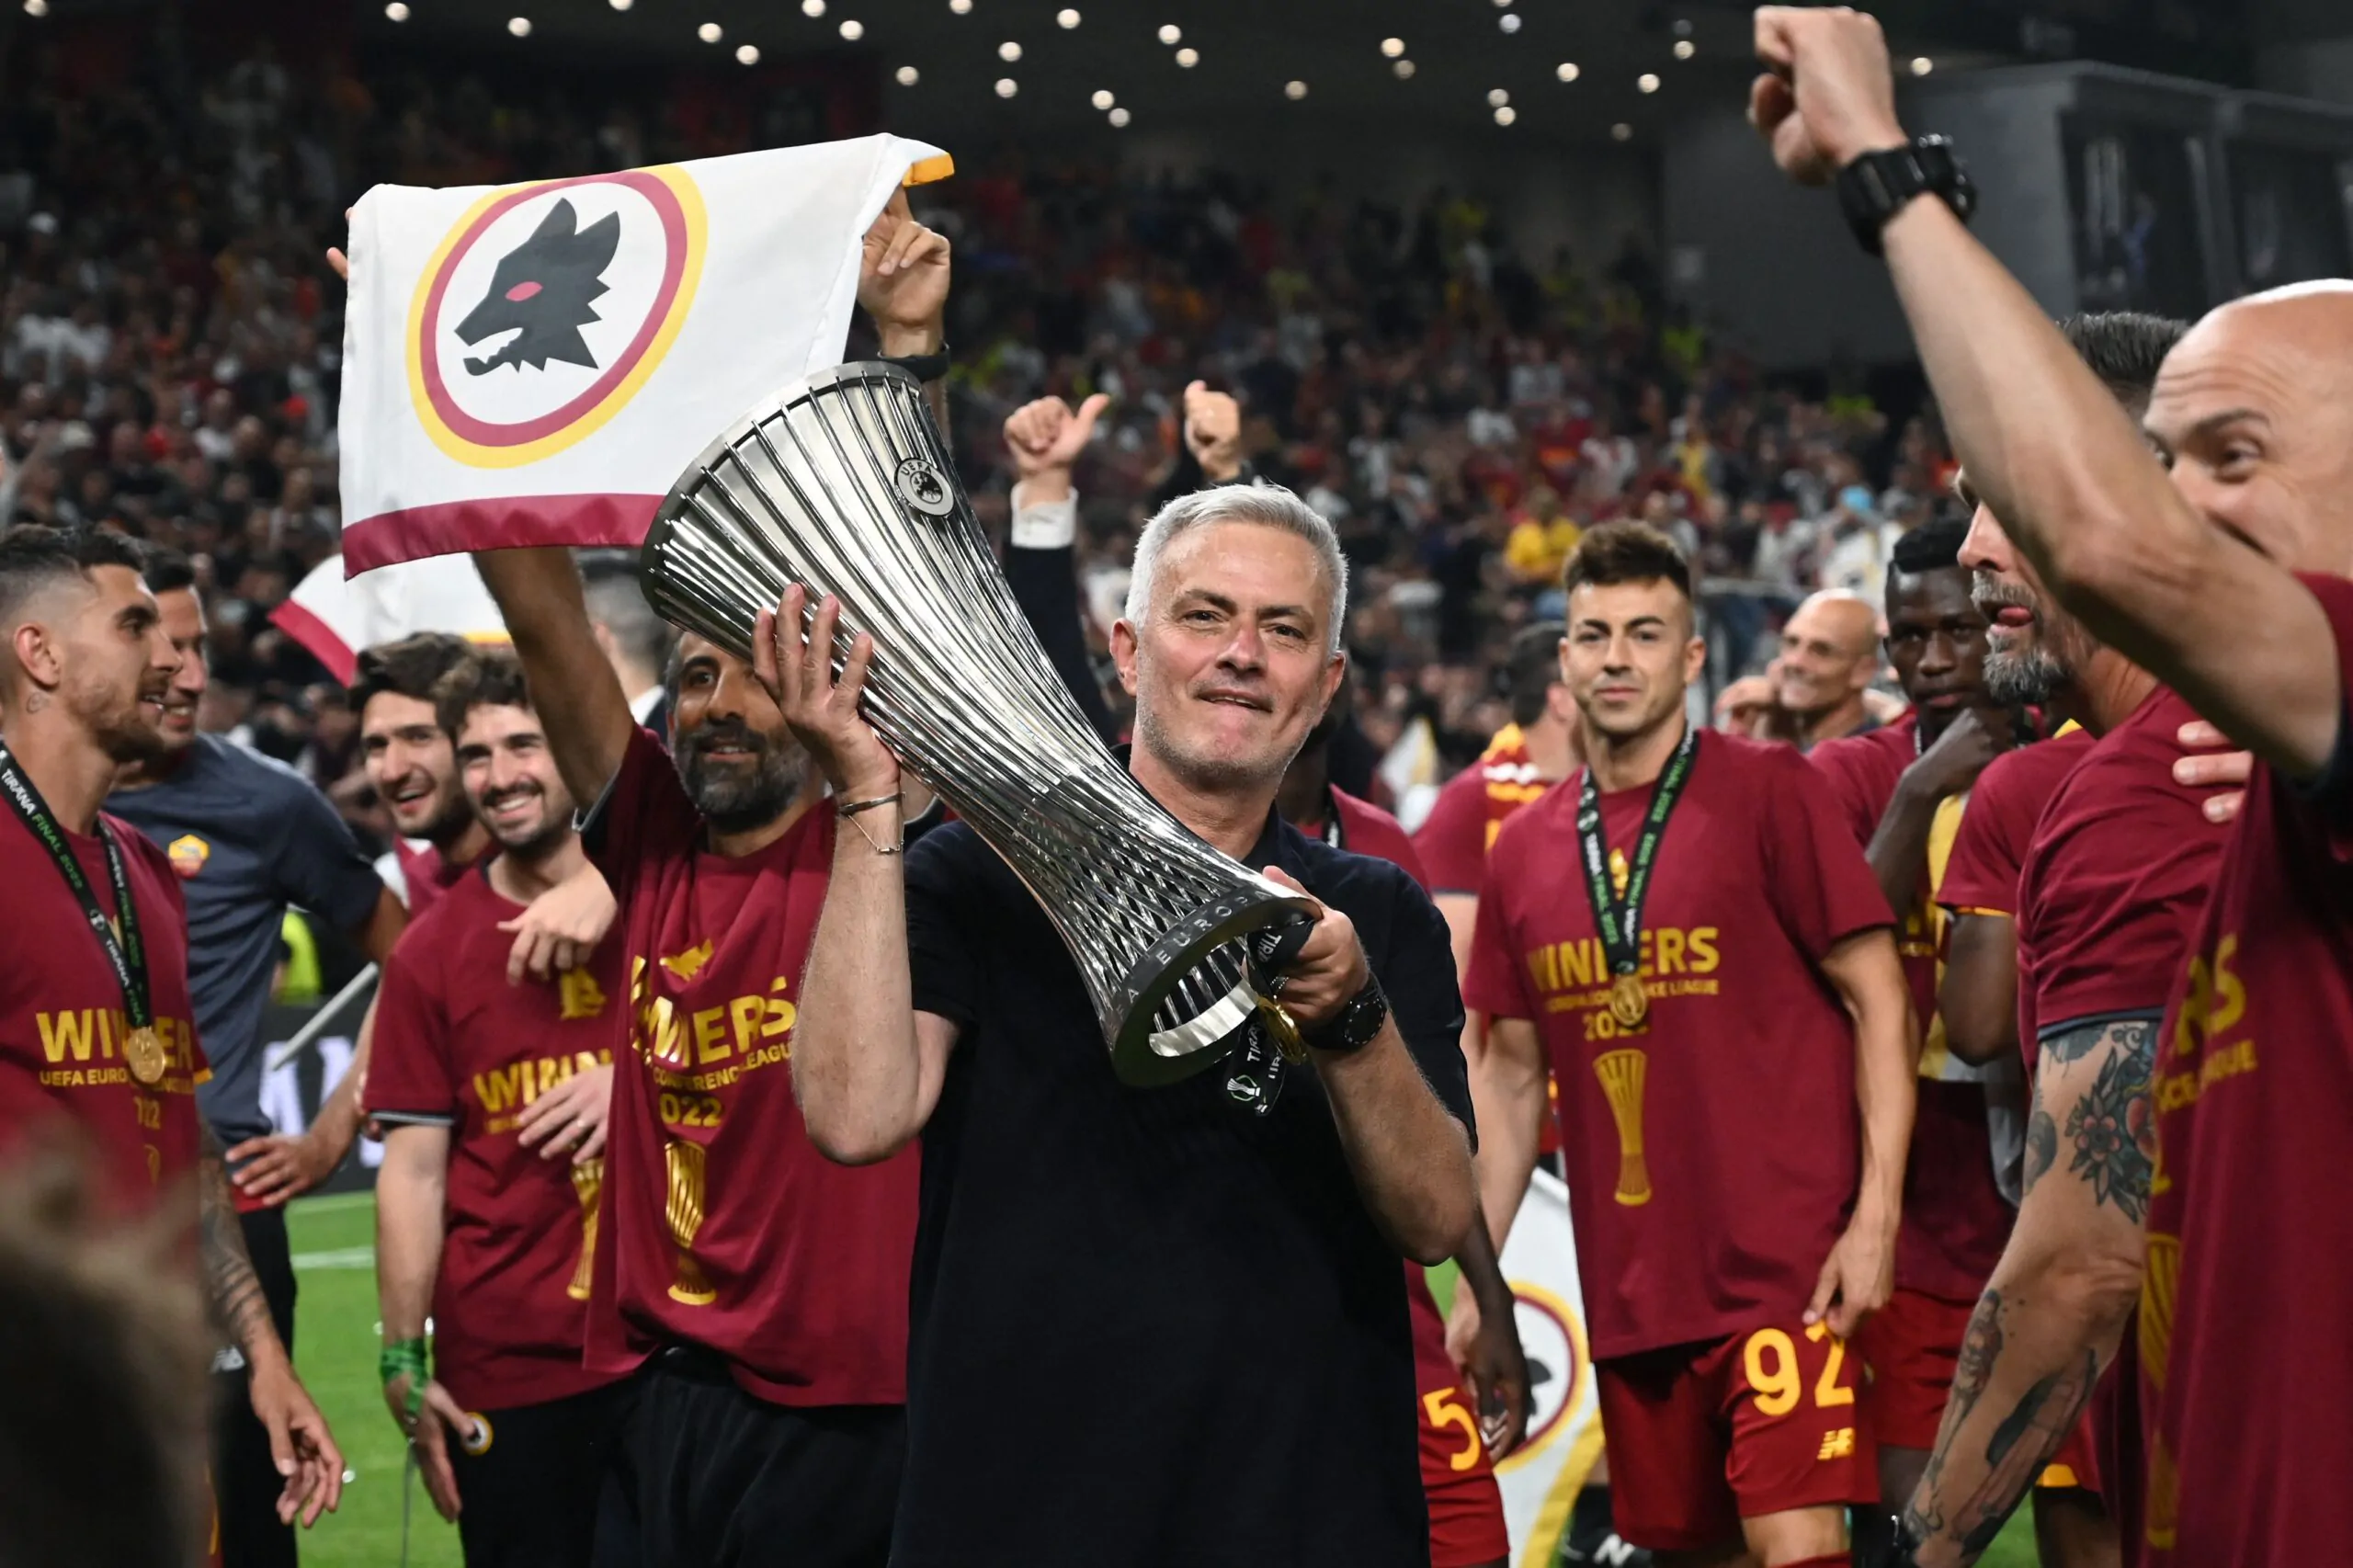 José Mourinho commented on his return to Serie A and hailed the European Conference League victory in a lengthy interview.